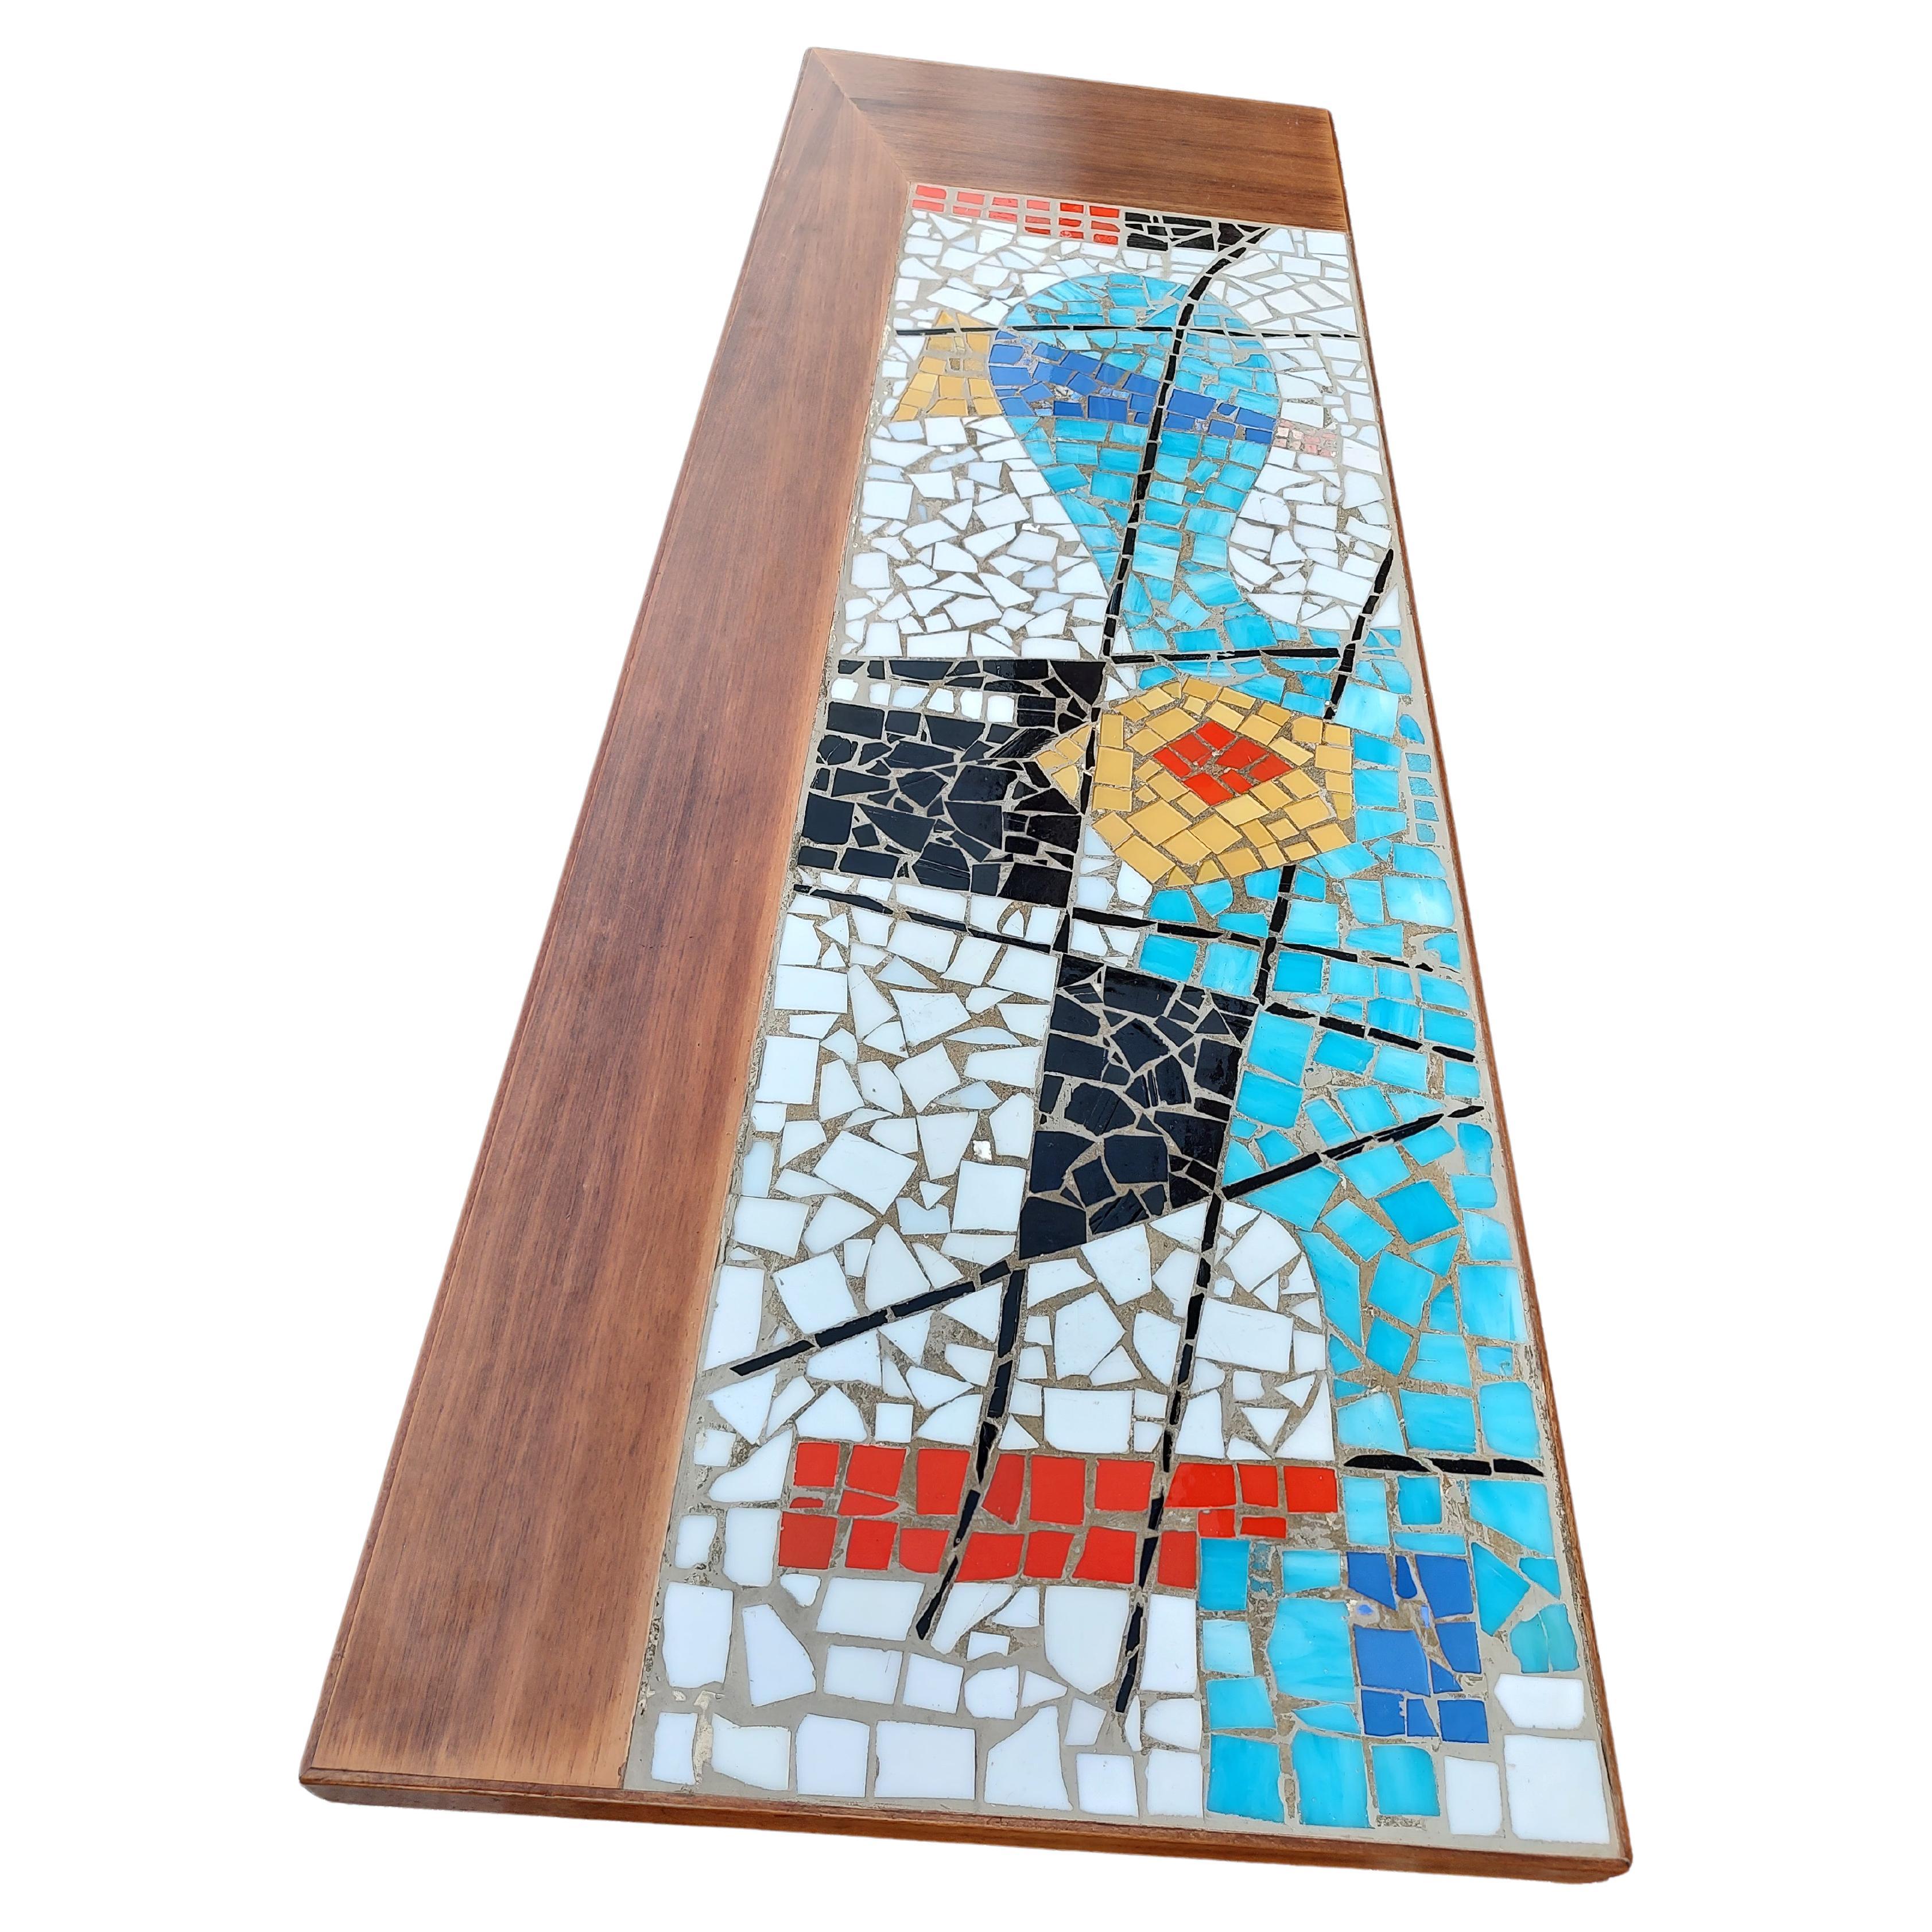 American Mid-Century Modern Sculptural Abstract Mosaic Glass Tile Cocktail Table, C1955 For Sale